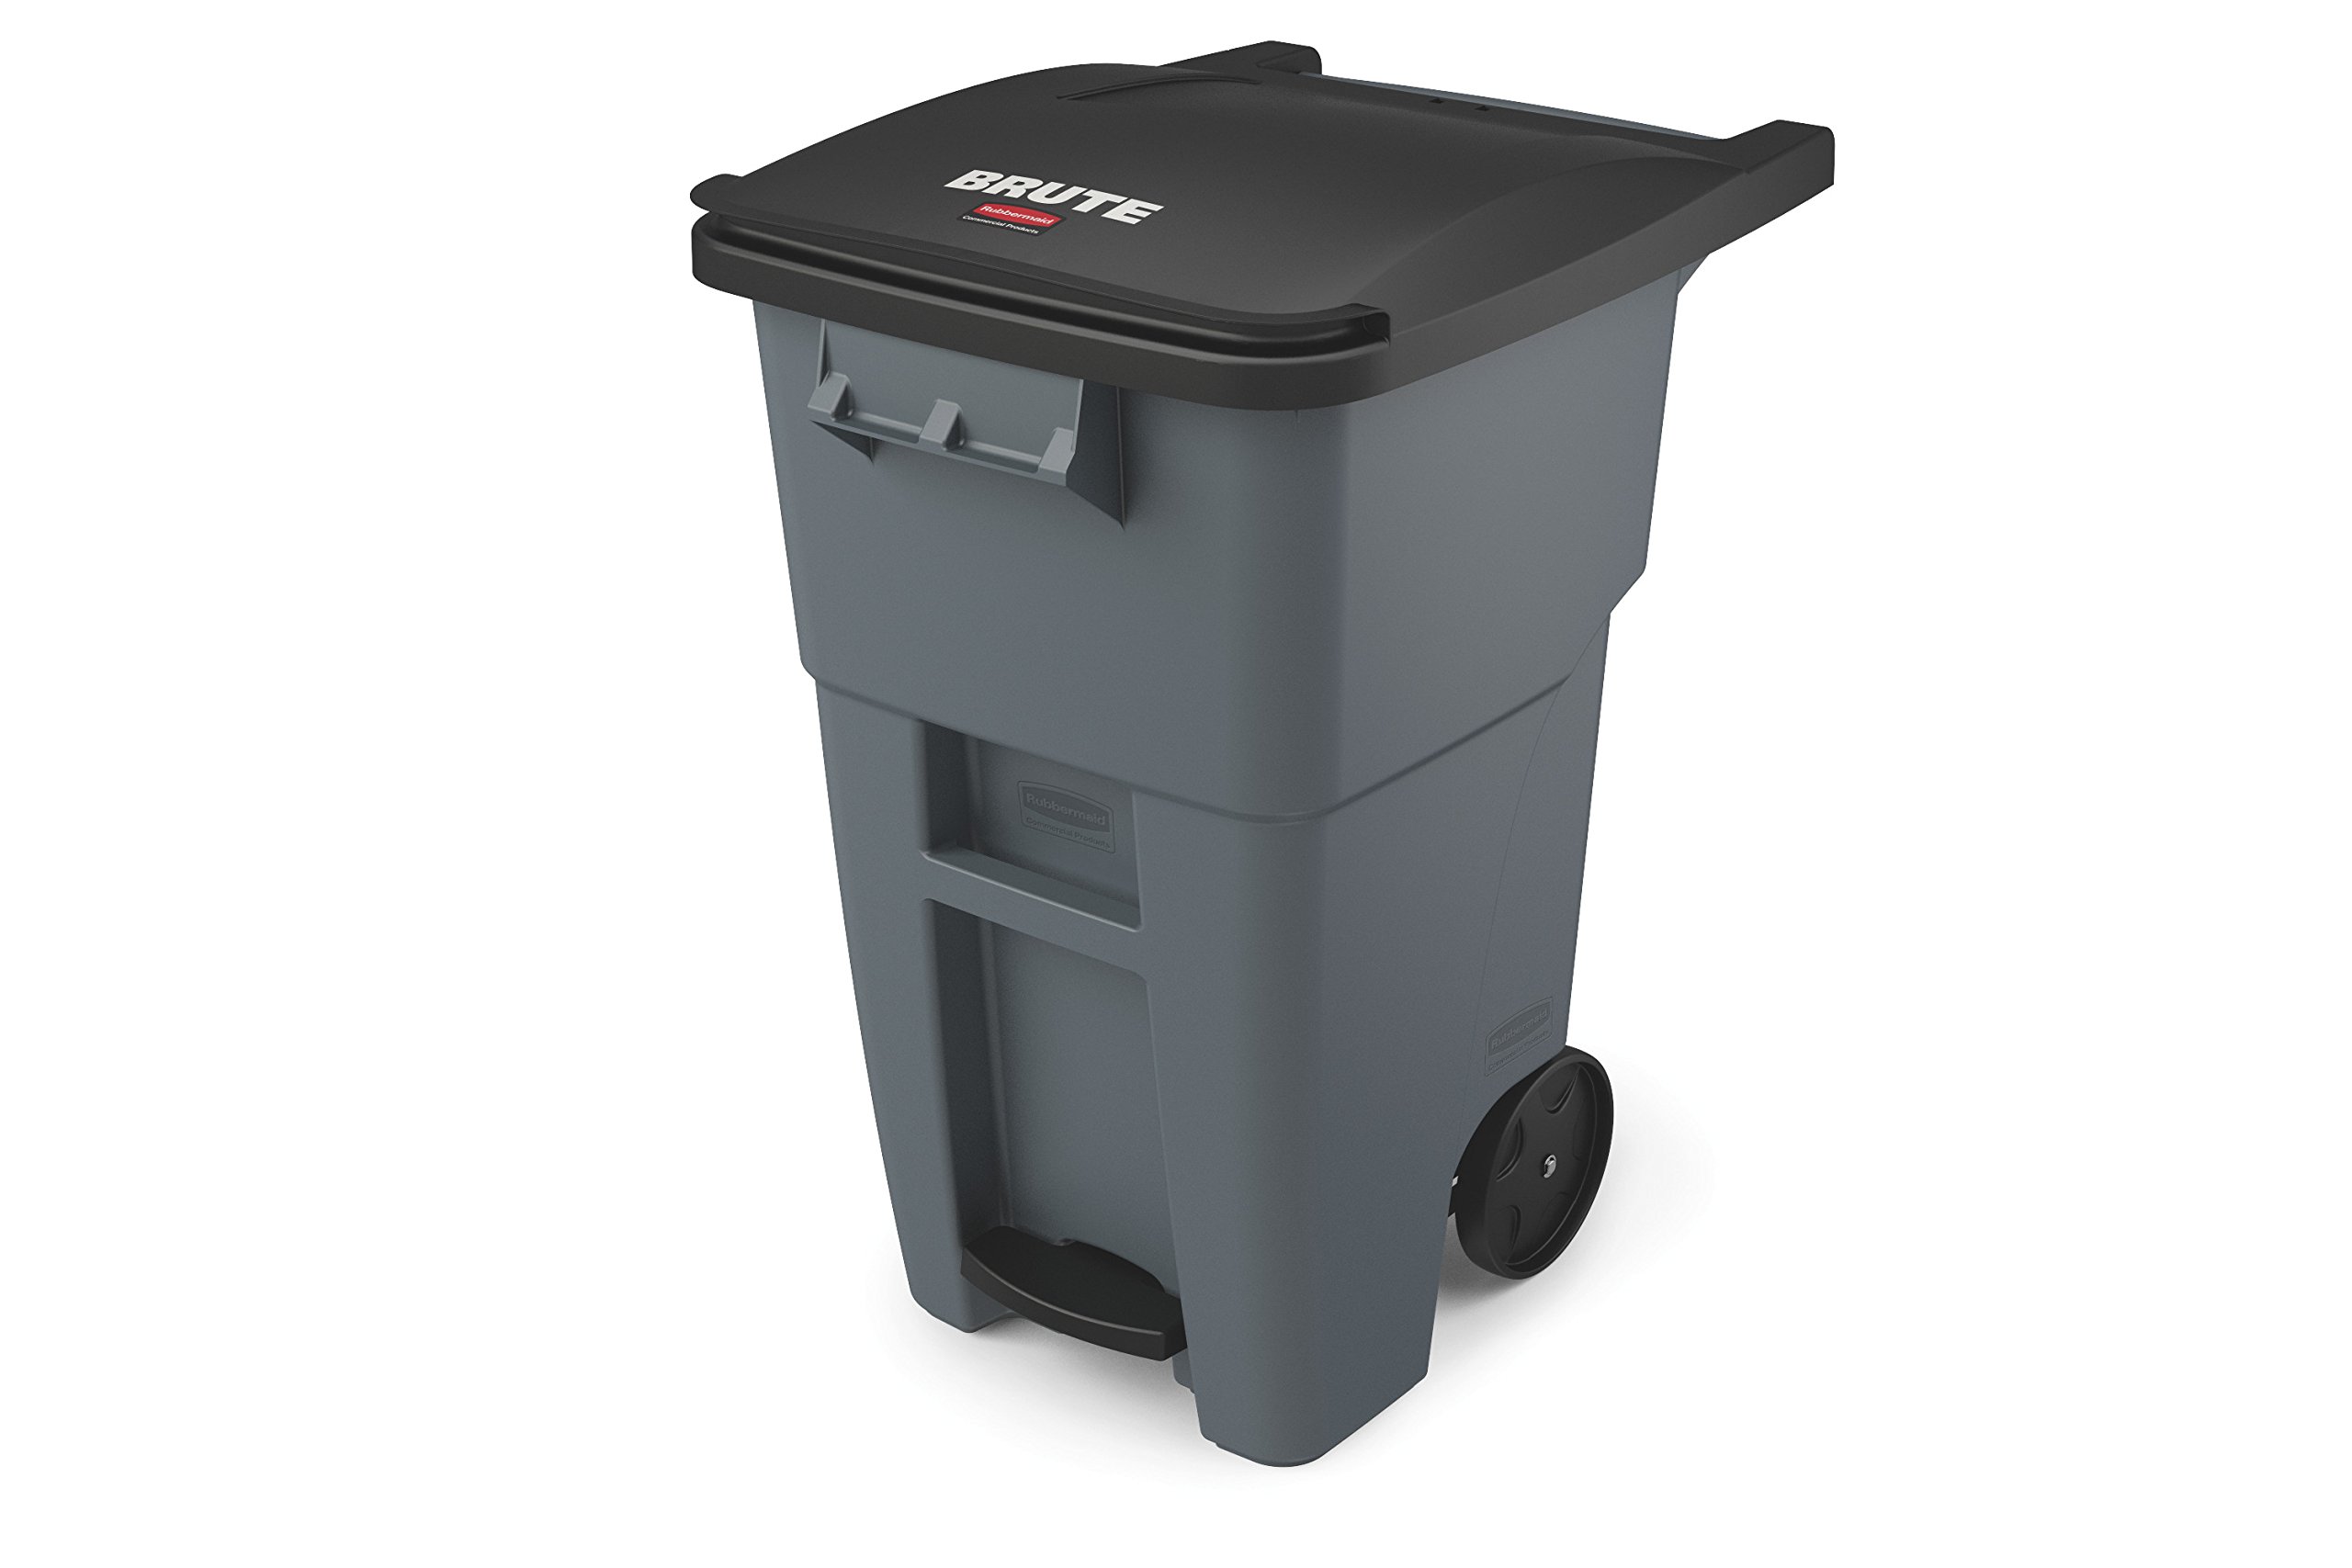 Rubbermaid Commercial Products Brute Step-On Rollout Trash/Garbage Can/Bin with Wheels, 50 GAL, for Restaurants/Hospitals/Offices/Back of House/Warehouses/Home, Gray (1971956)